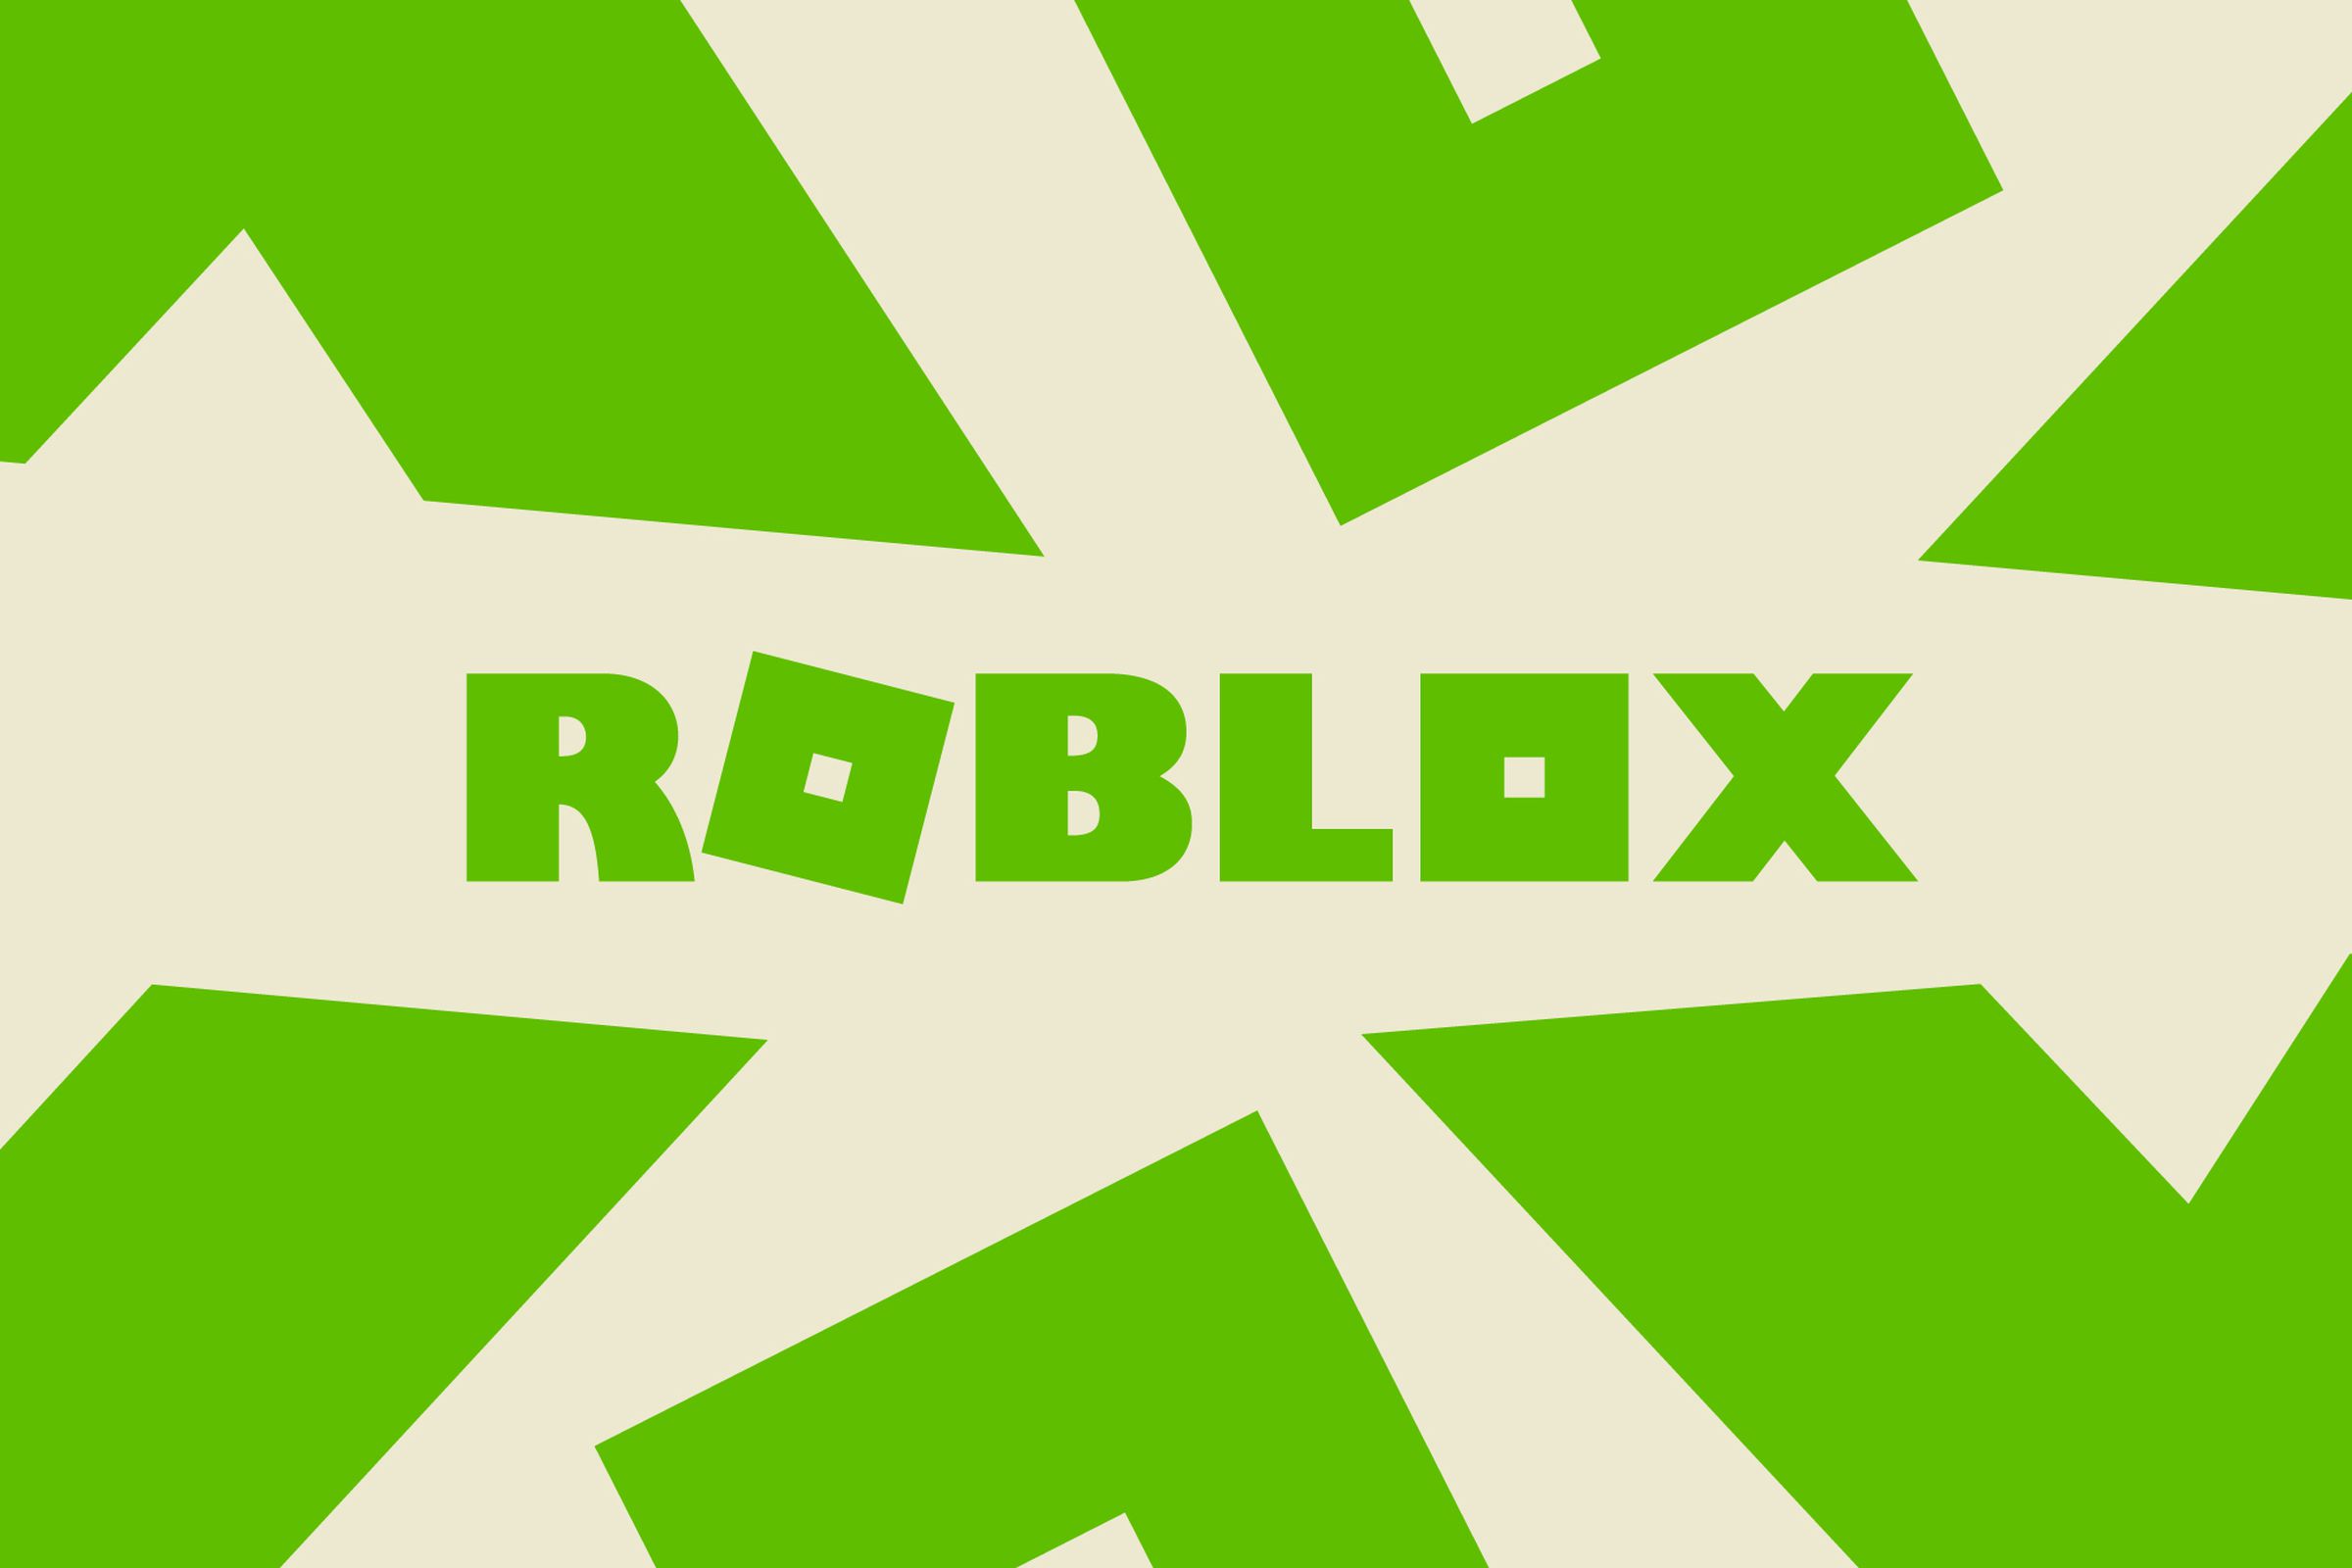 An illustration of the Roblox logo.